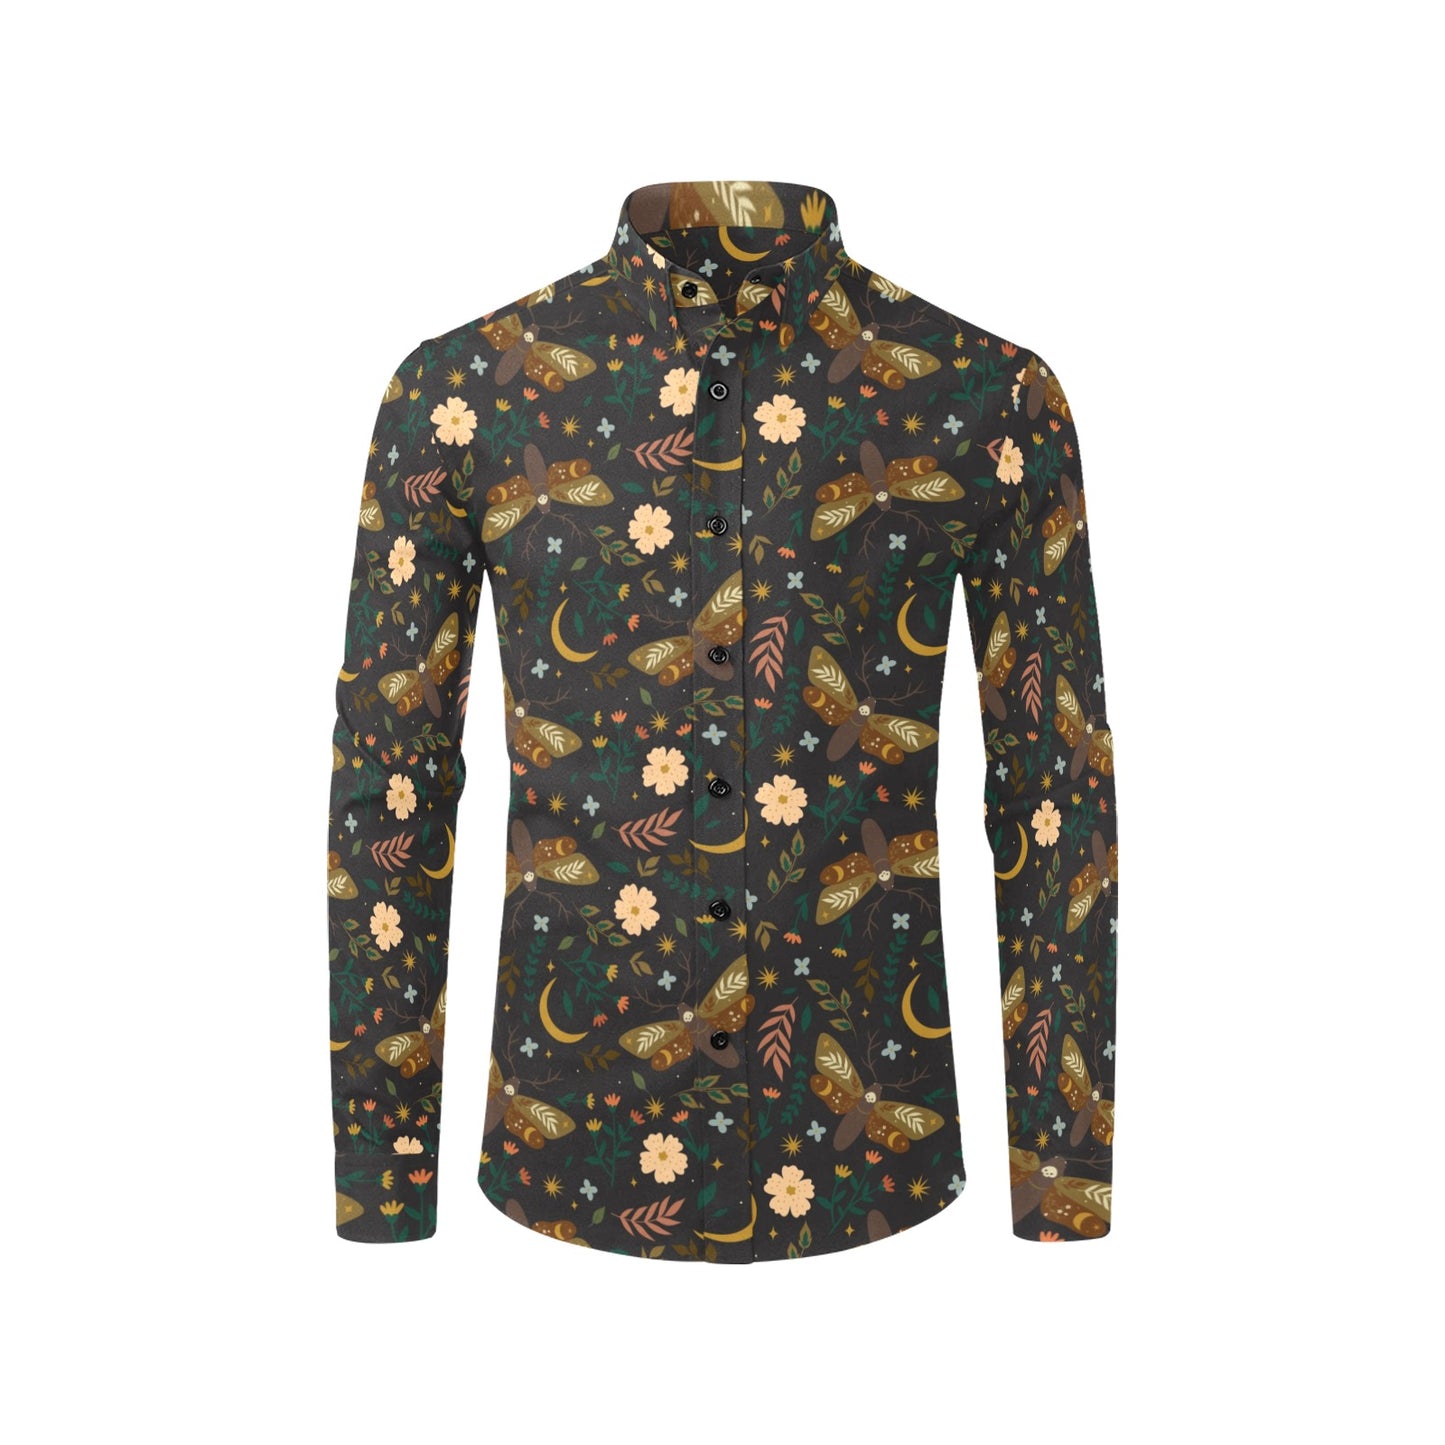 Moth and Flowers long sleeve button-up shirt